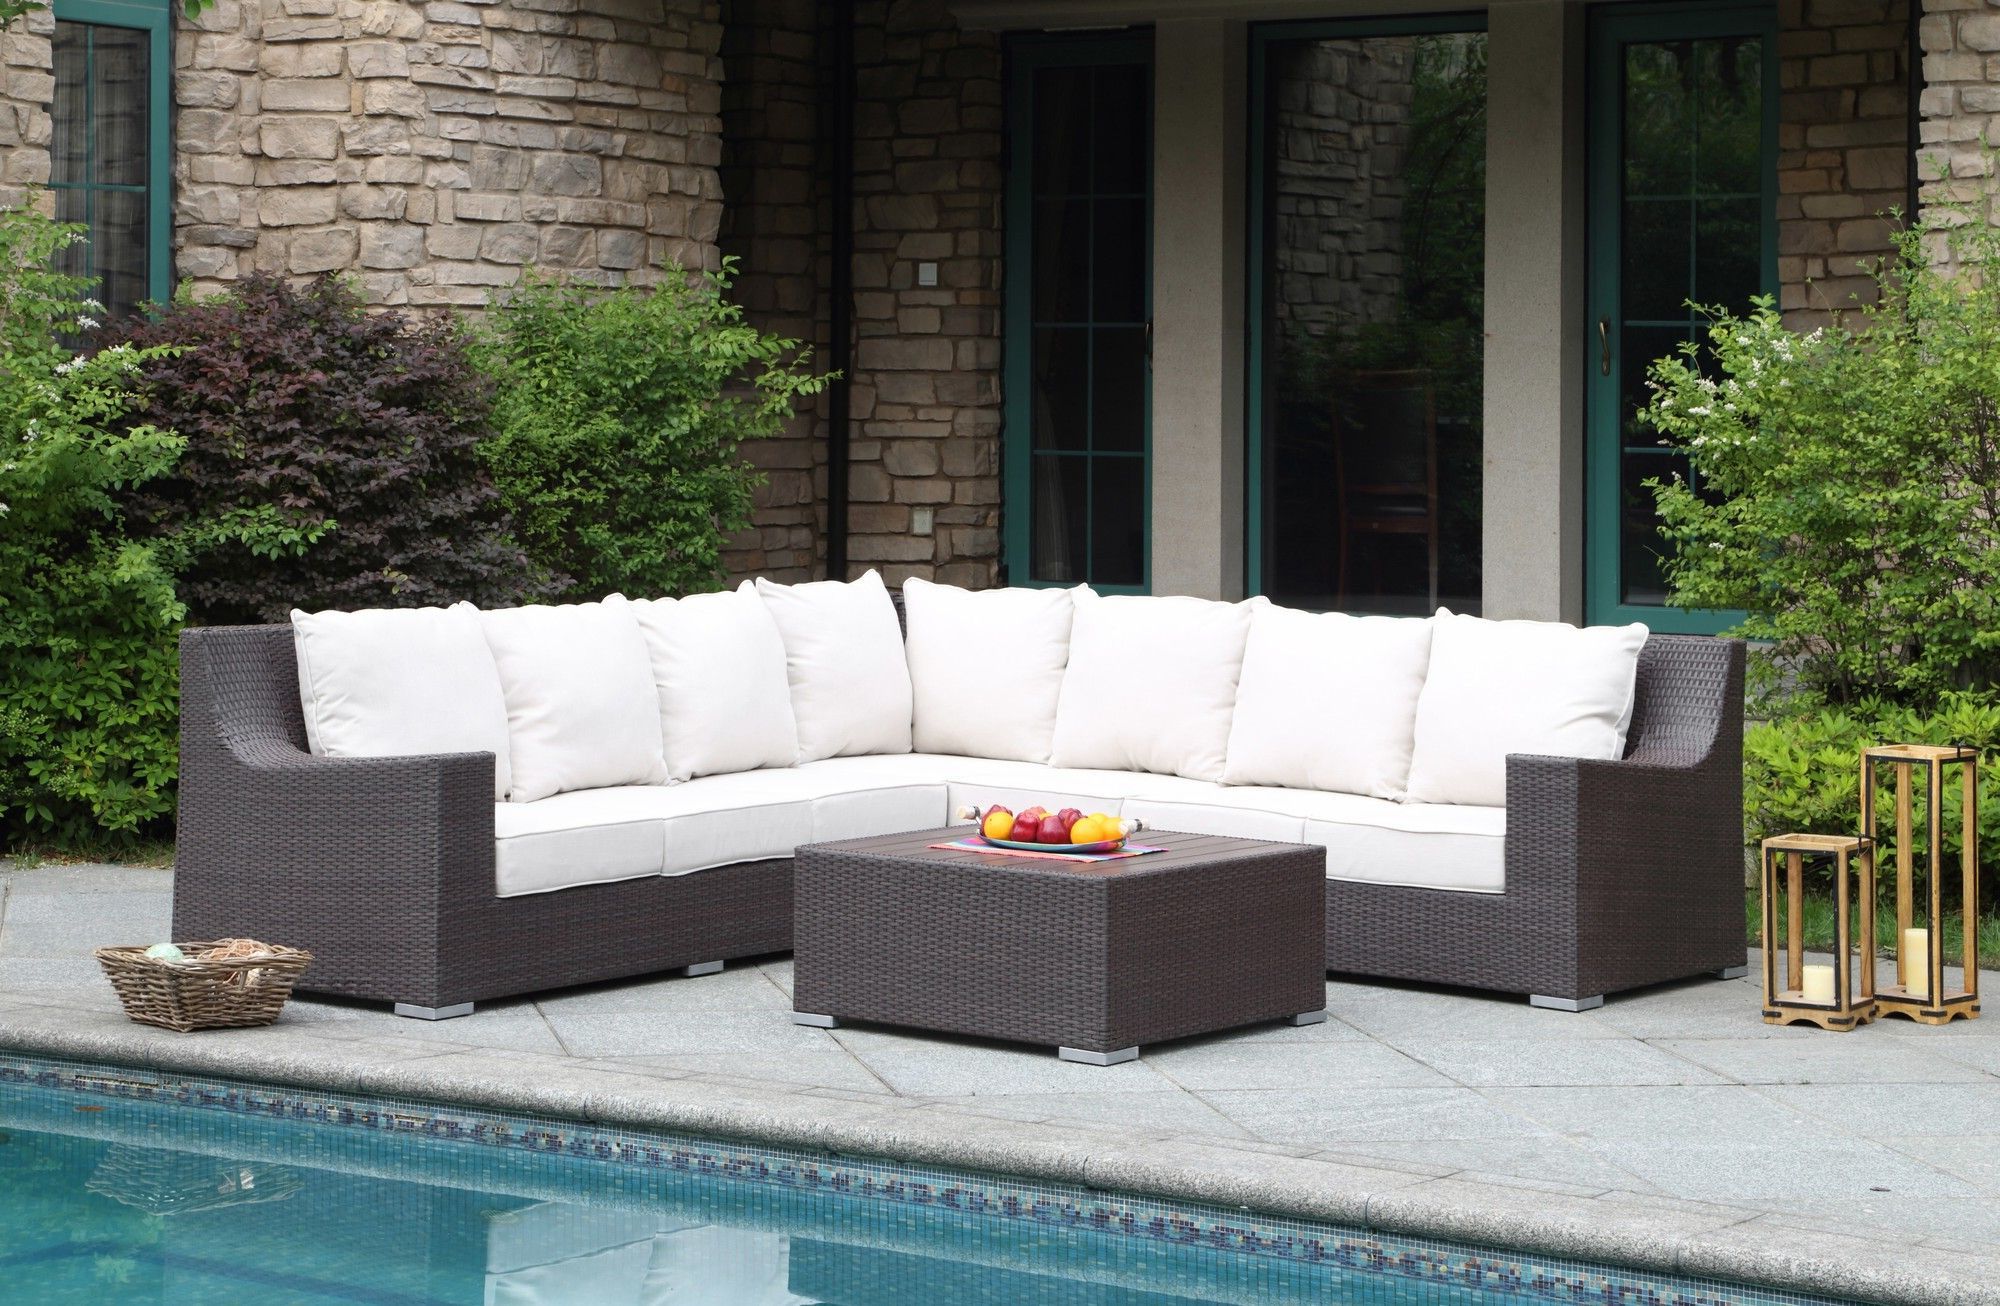 4 Piece Outdoor Seating Patio Sets With Regard To Newest Panama 4 Piece Deep Seating Group (View 13 of 15)